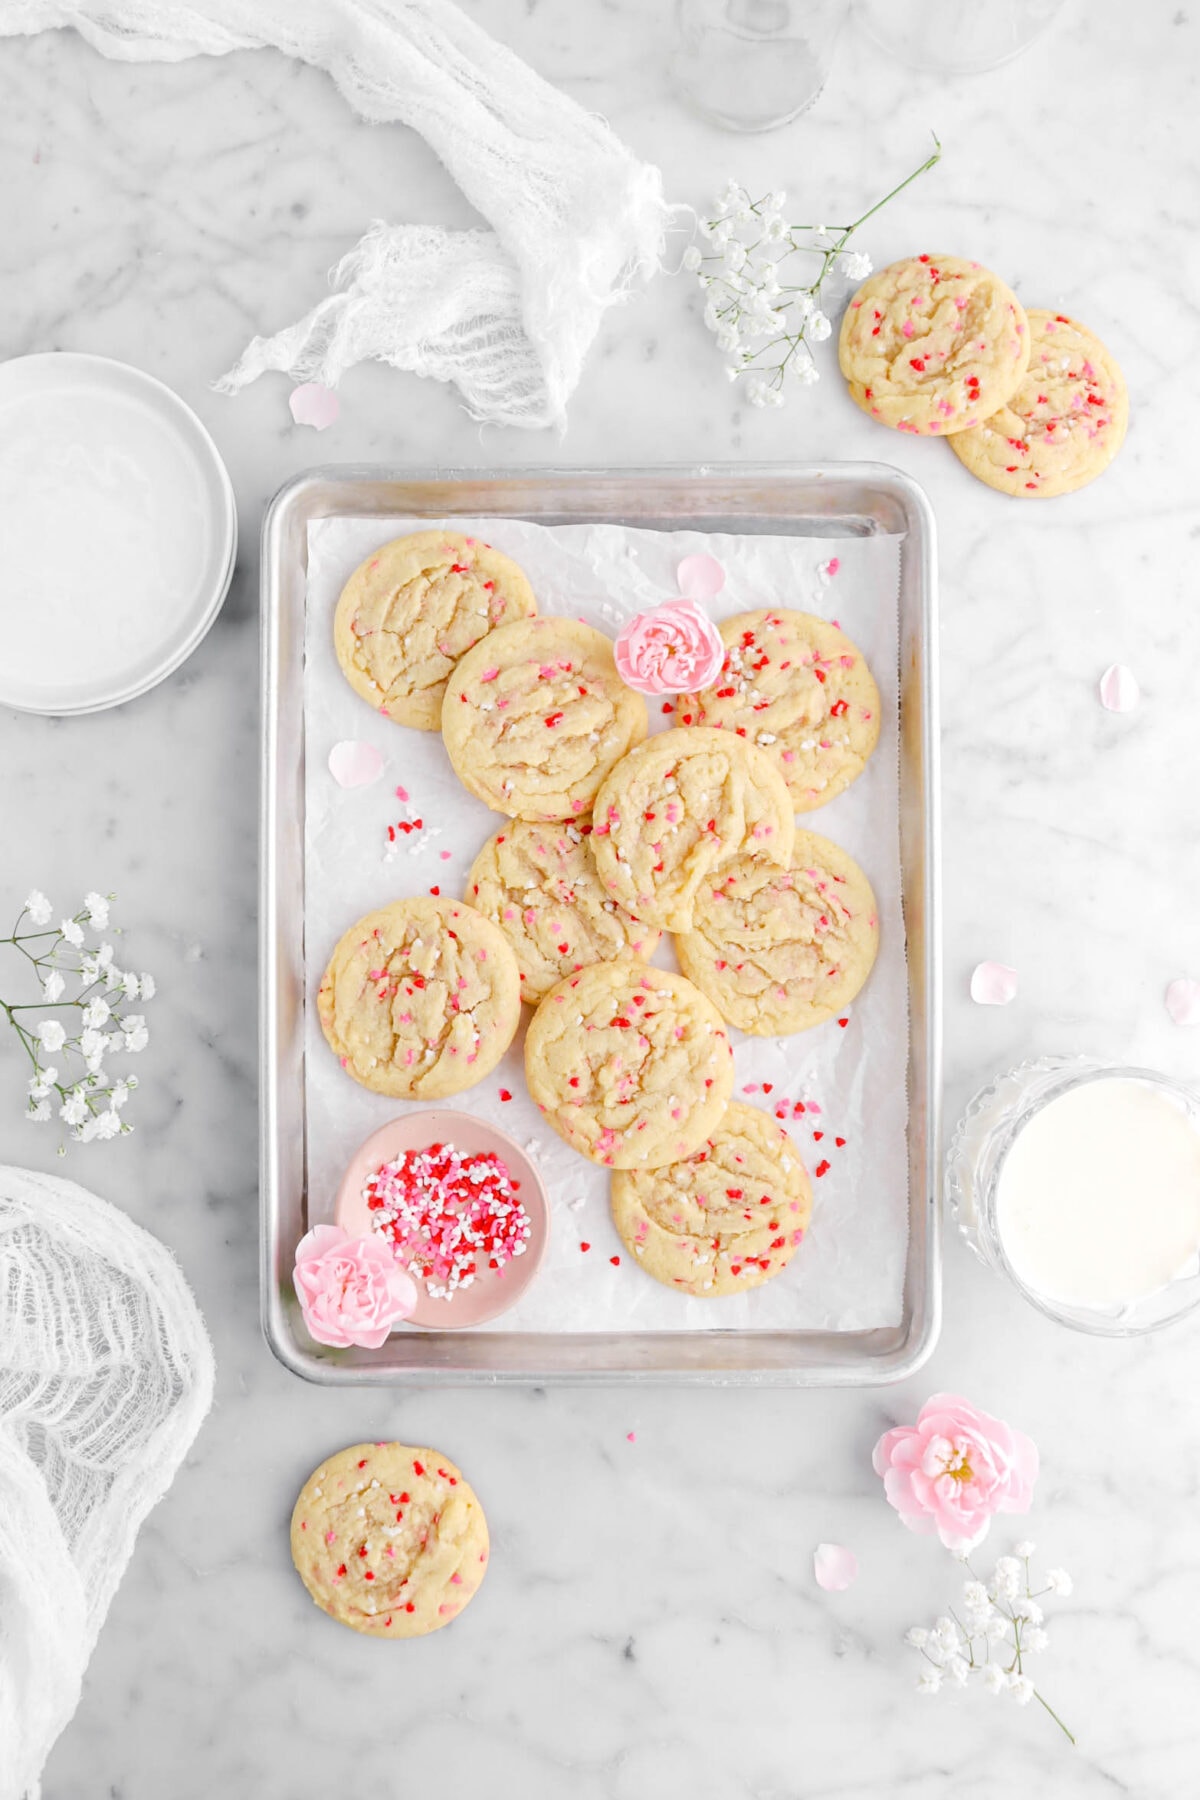 overhead shot of nine sugar cookies in parchment lined sheet pan with one missing a bite, two pink carnations, and pink bowl of sprinkles, with three more cookies around on marble surface, another pink carnation, white flowers, a glass of milk, a stack of plates, and a white cheesecloth beside.